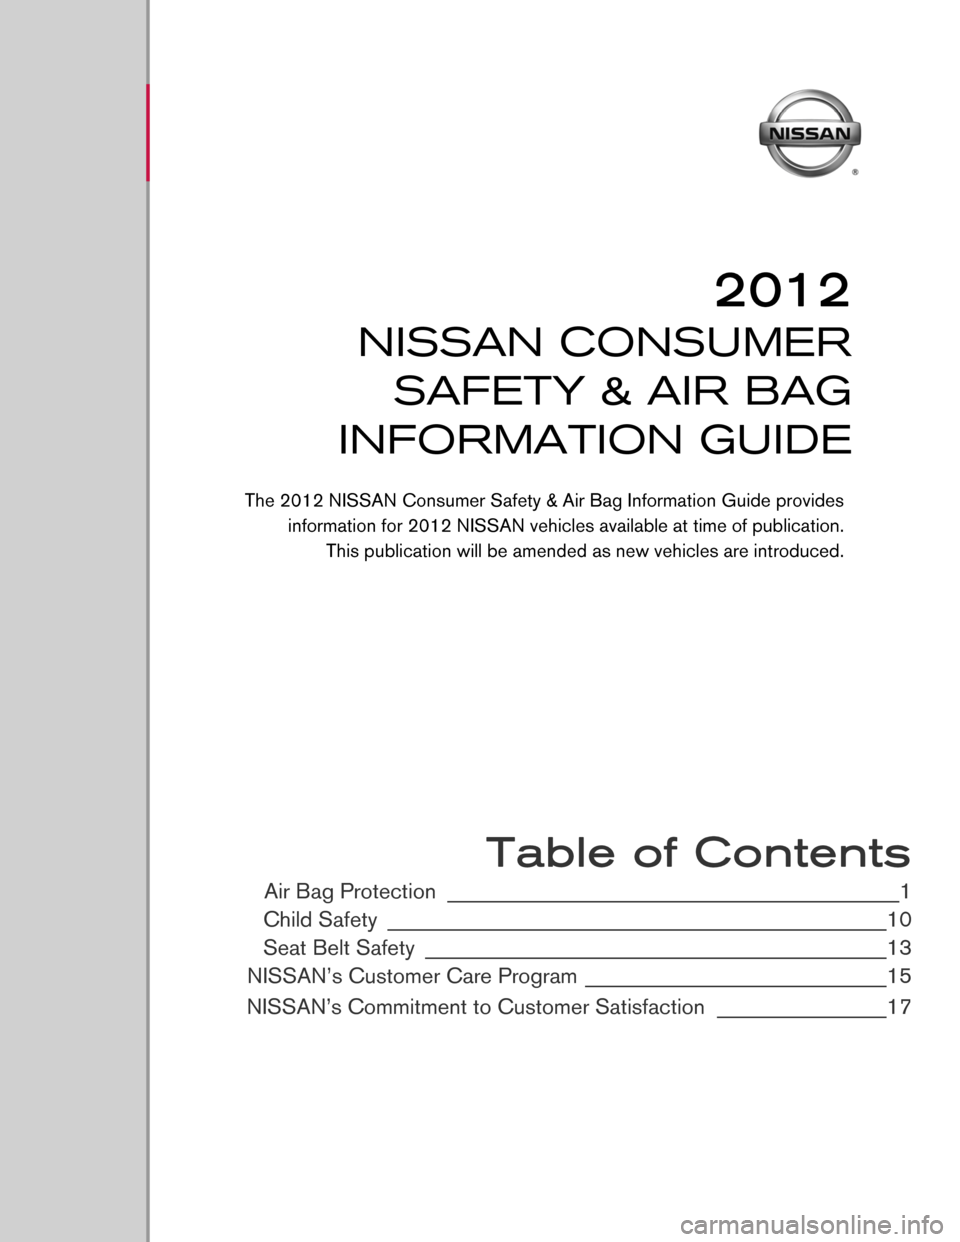 NISSAN ALTIMA COUPE 2012 D32 / 4.G Consumer Safety Air Bag Information Guide  
 
 
 
 
 
 
 
 
 
 
 
 
 
 
 
 
 
 
 
 
 
 
 Table of Contents
Air Bag Protection ________________________________________________1
Child Safety
 ____________________________________________________